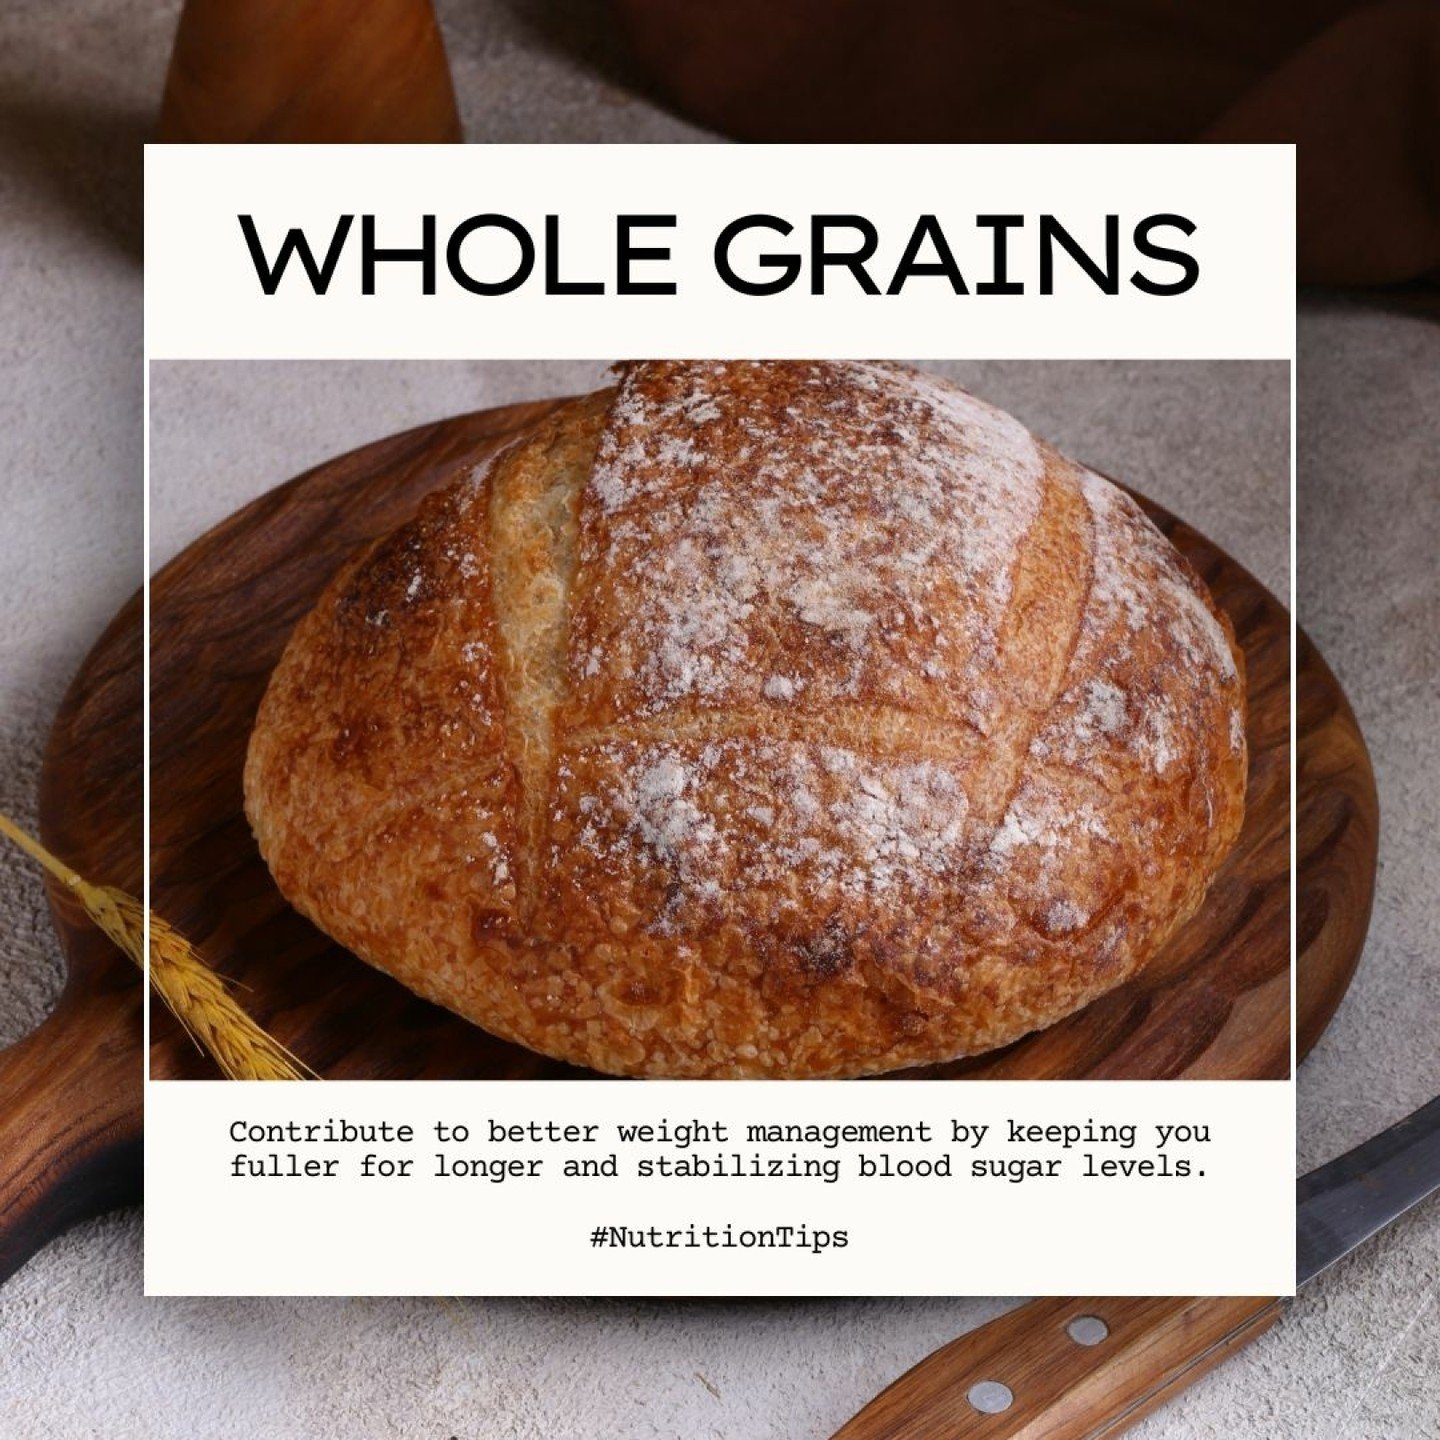 🌾Whole grains are essential for a balanced and nutritious diet. 

🌾They are packed with fiber, which aids in digestion and helps maintain a healthy gut. 

🌾Unlike refined grains, whole grains retain all parts of the grain kernel, providing more nu